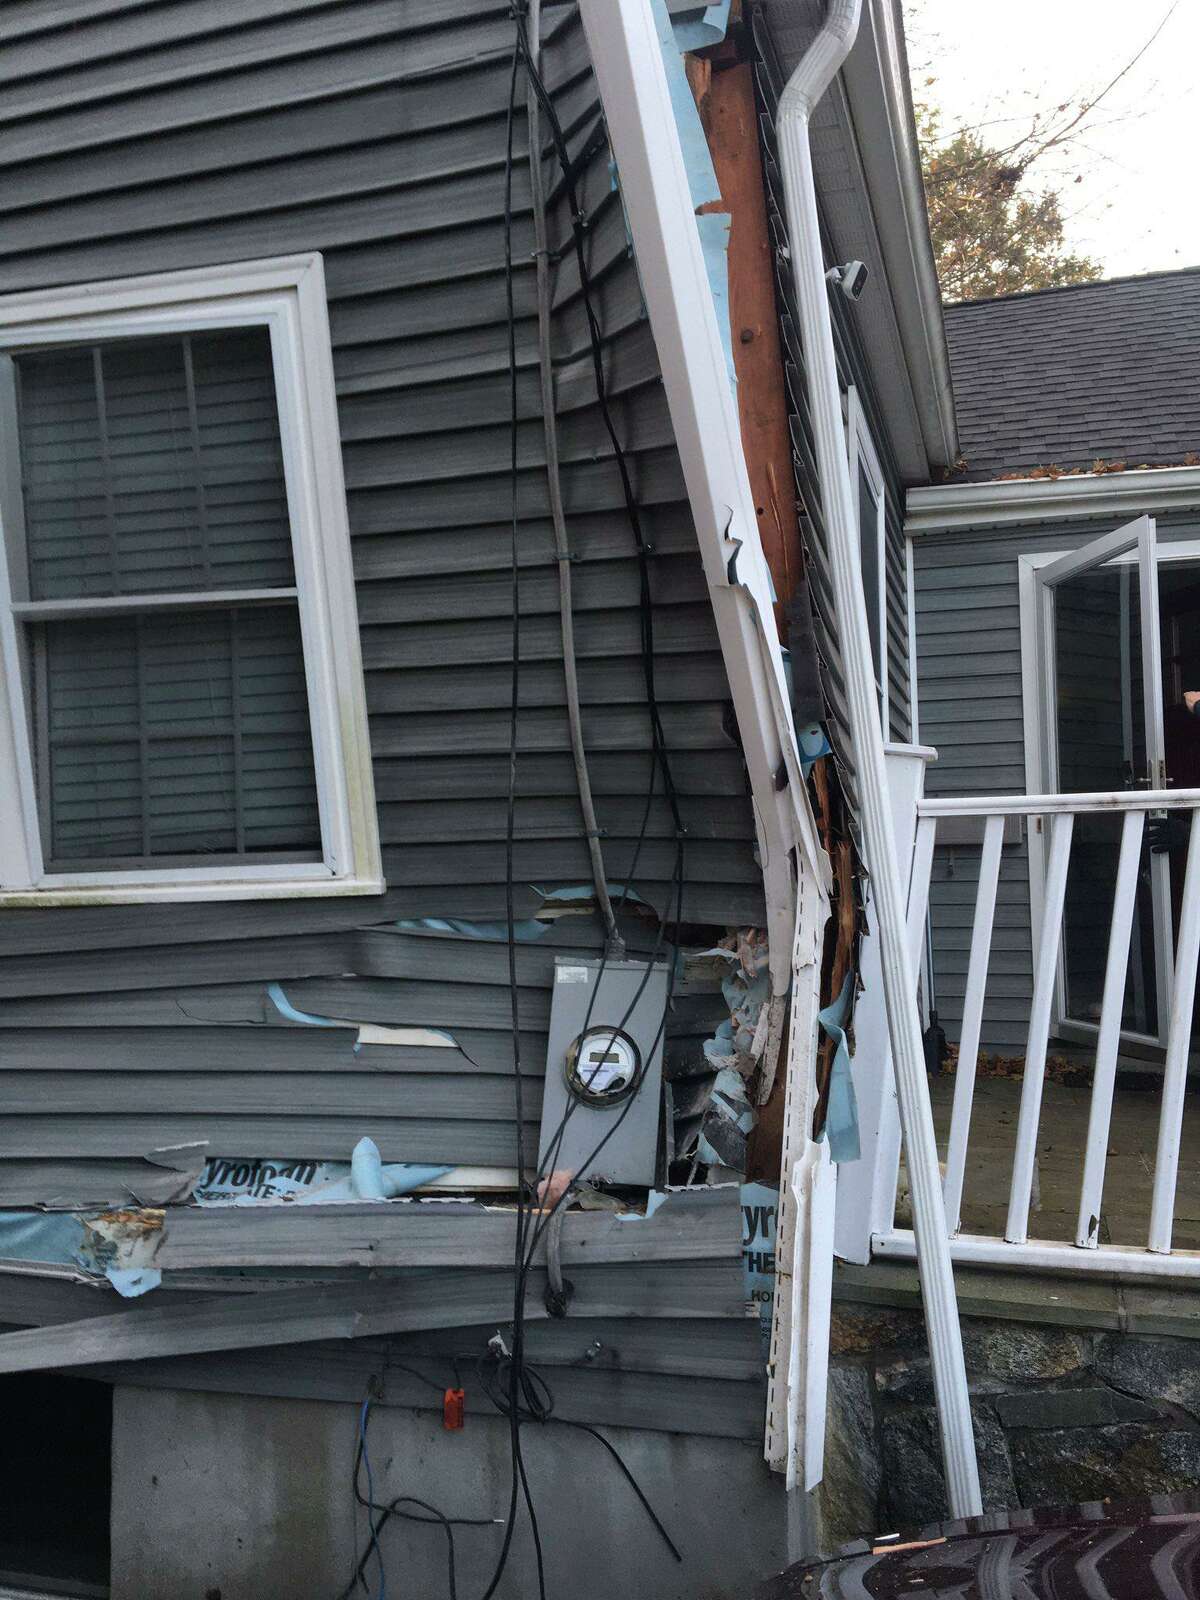 A driver crashed into a home on Oaklawn Avenue in Stamford, Conn., on Friday, Nov. 29, 2019.